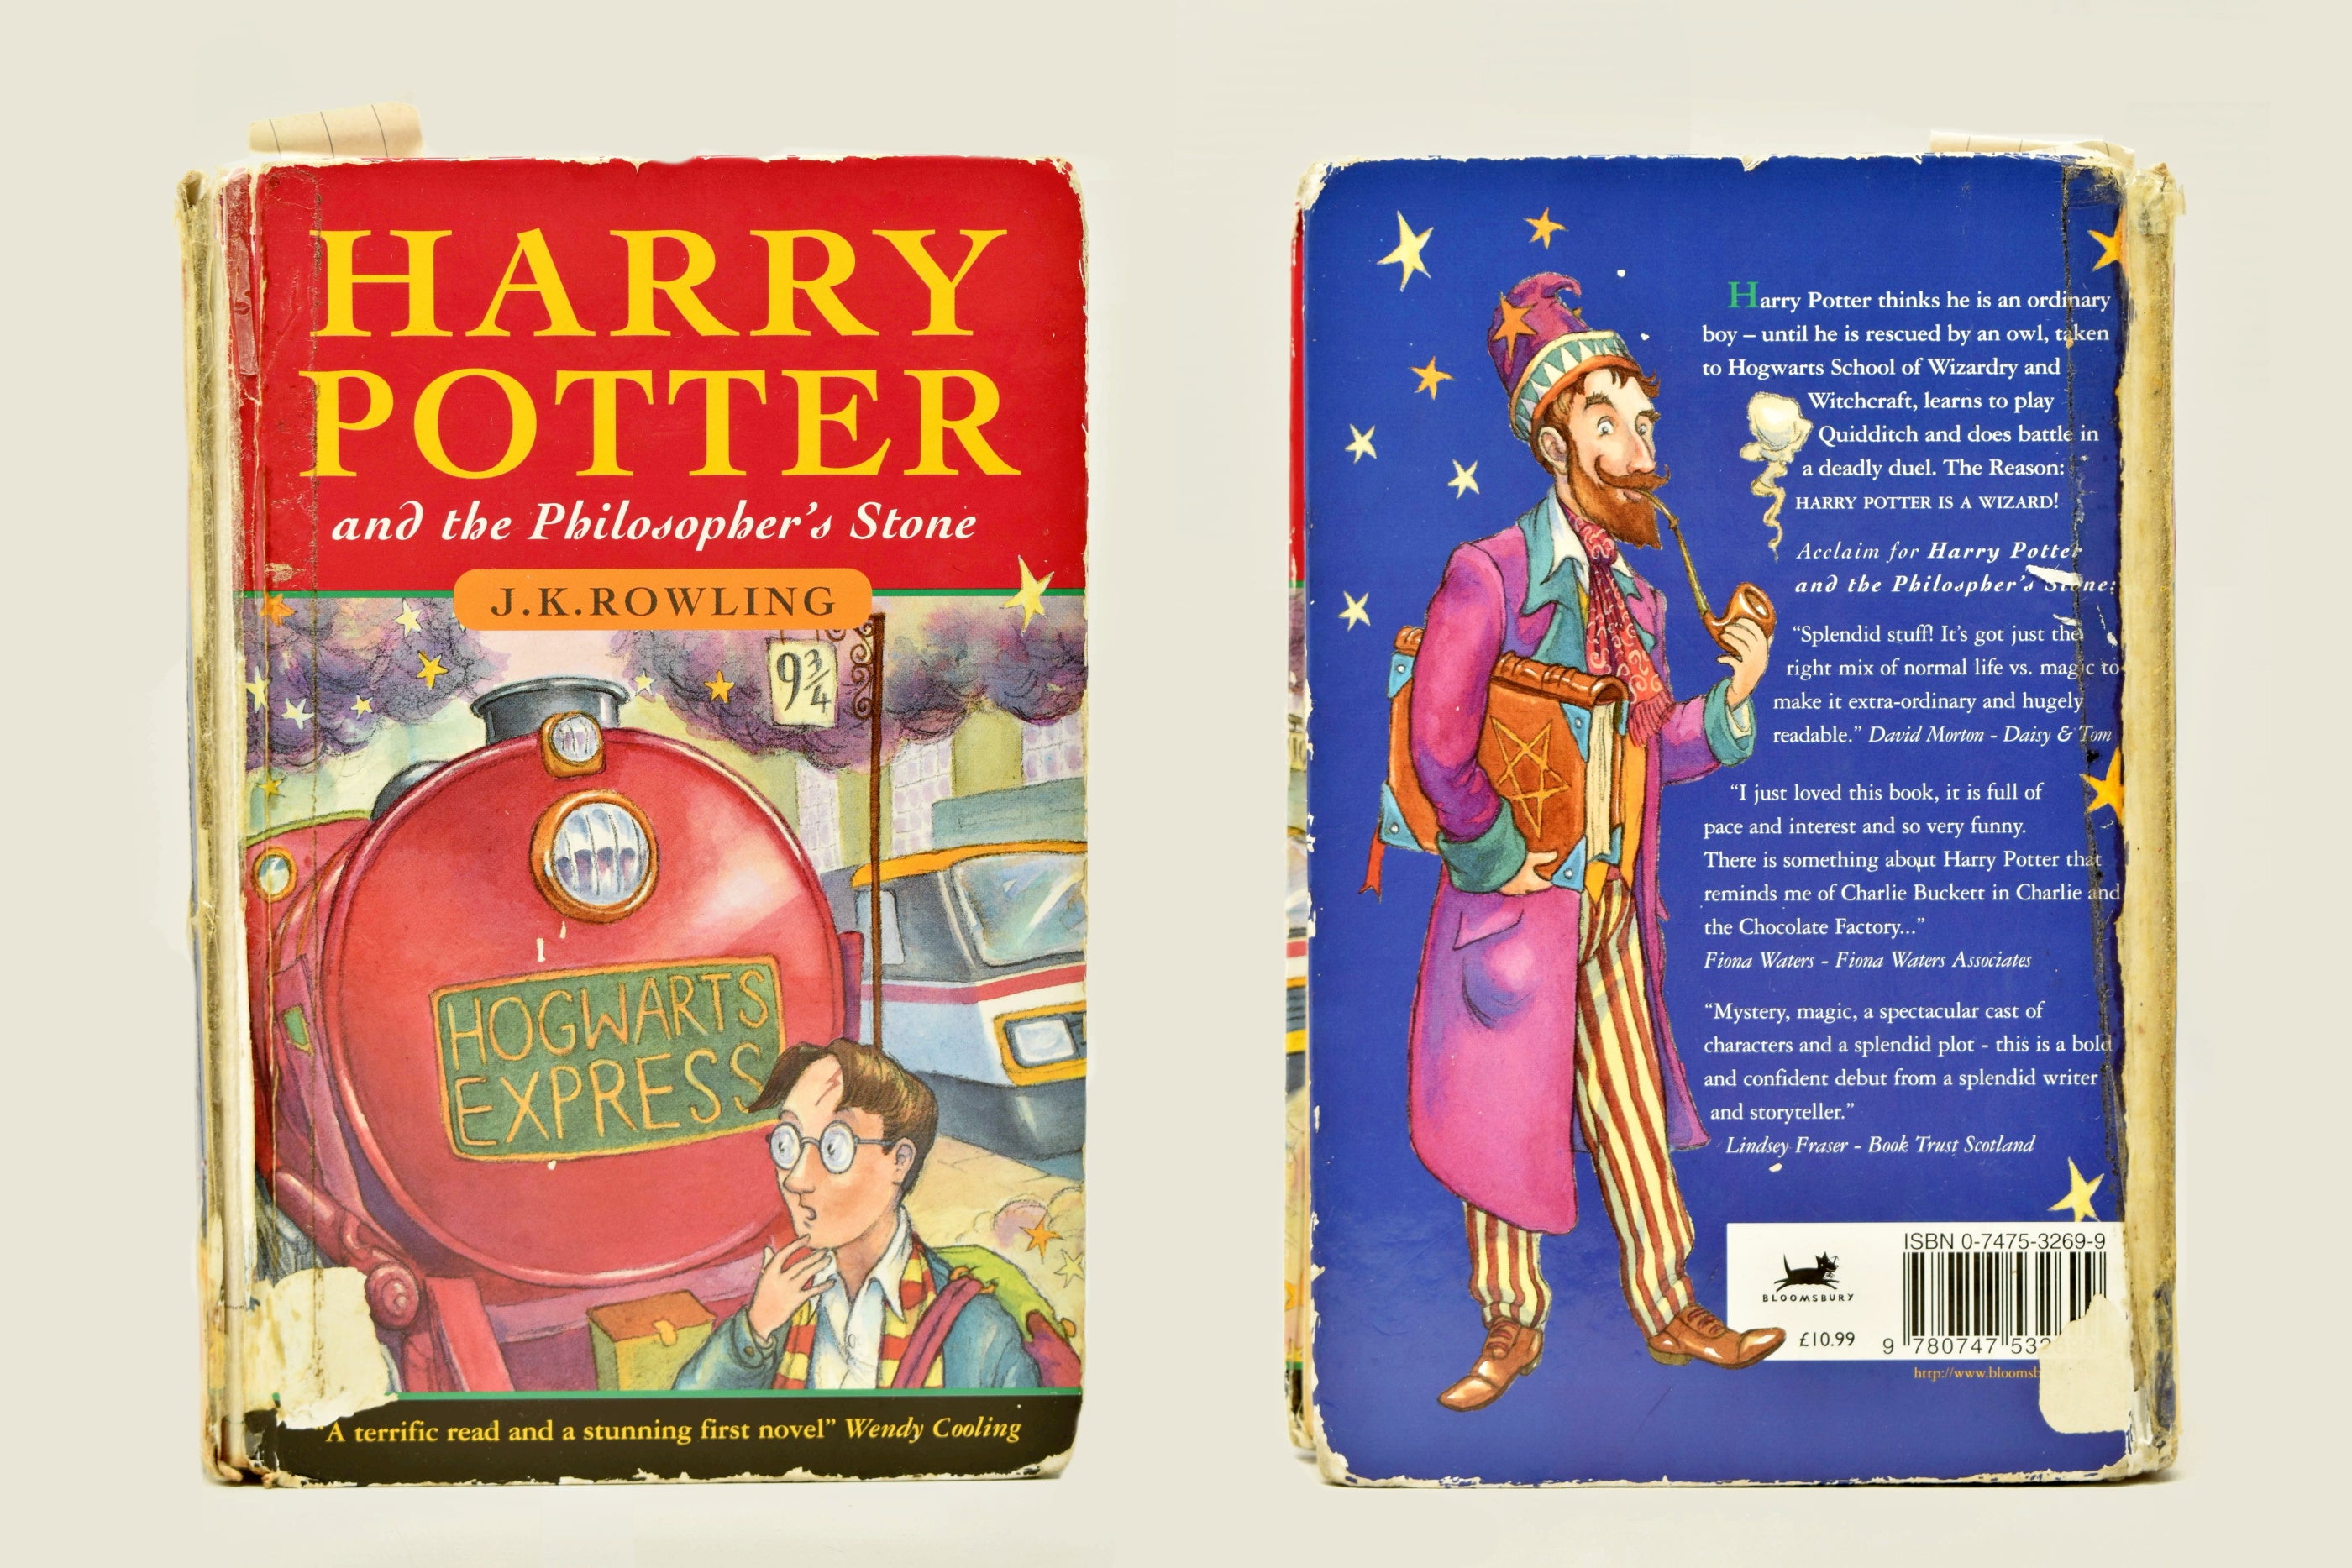 The rare first edition 1996 Bloomsbury publication of ‘Harry Potter and the Philosopher’s Stone', which was purchased from a library for pennies